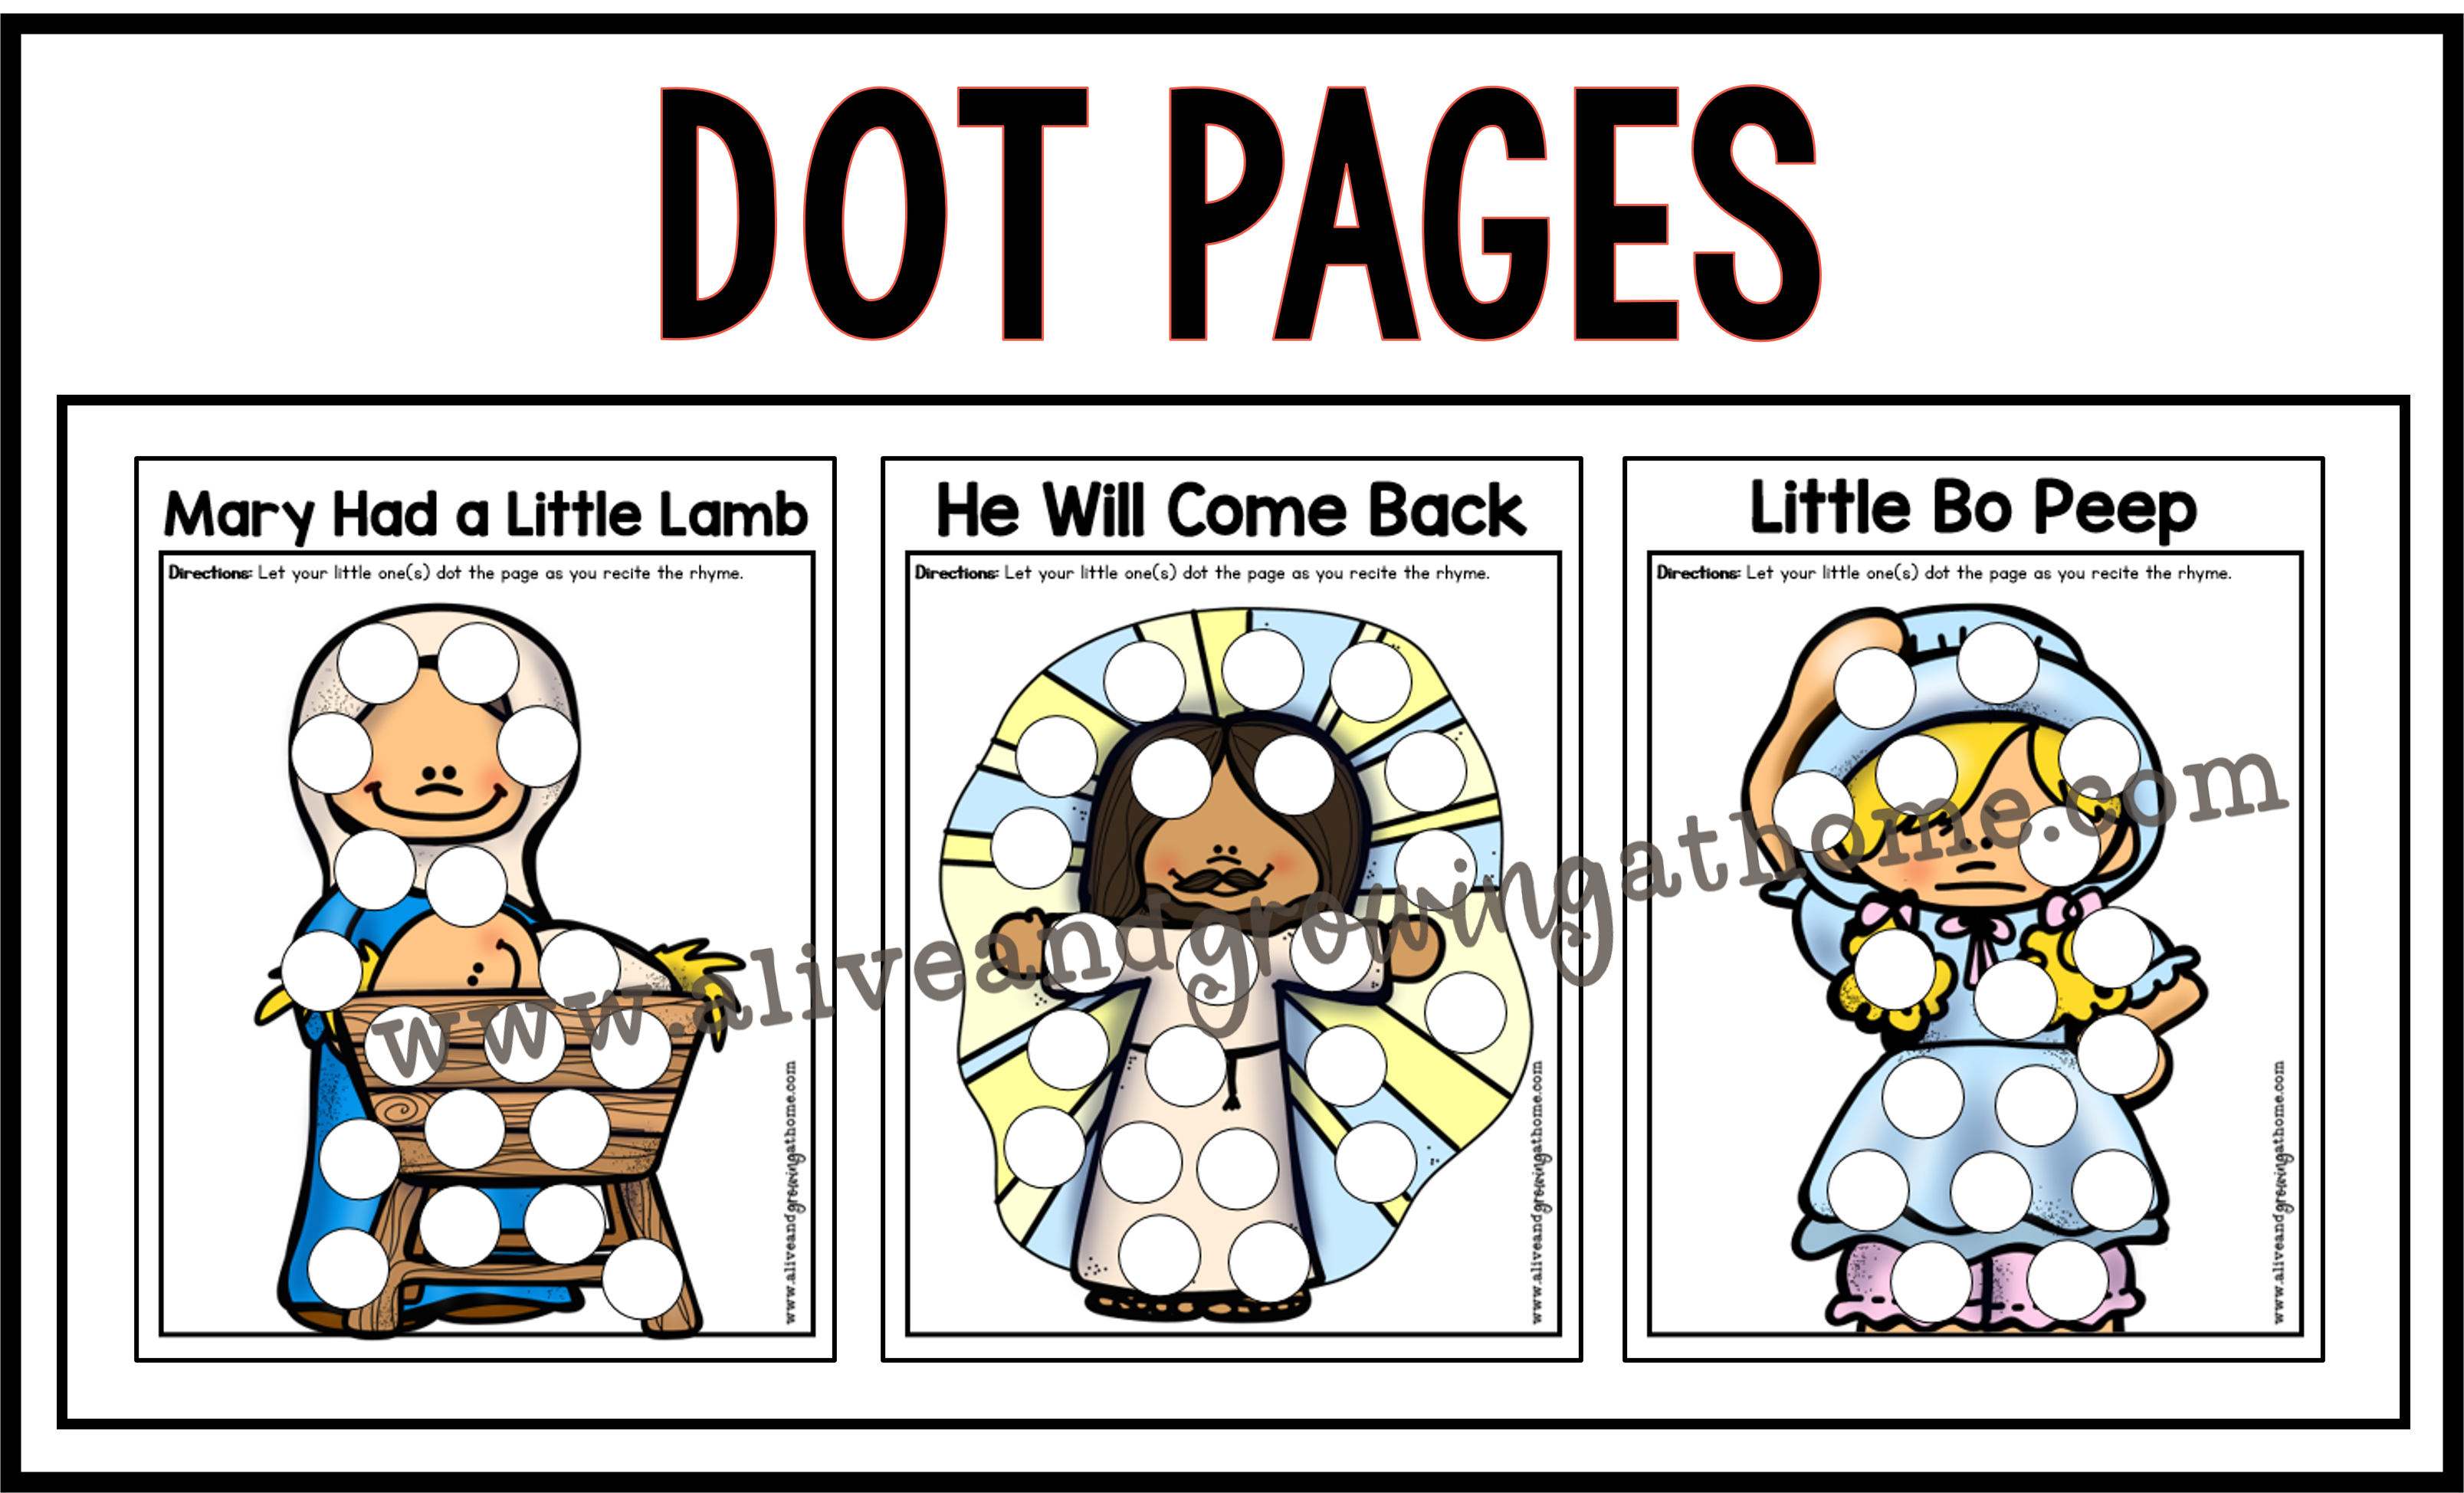 Dot Pages - Christian Nursery Rhymes